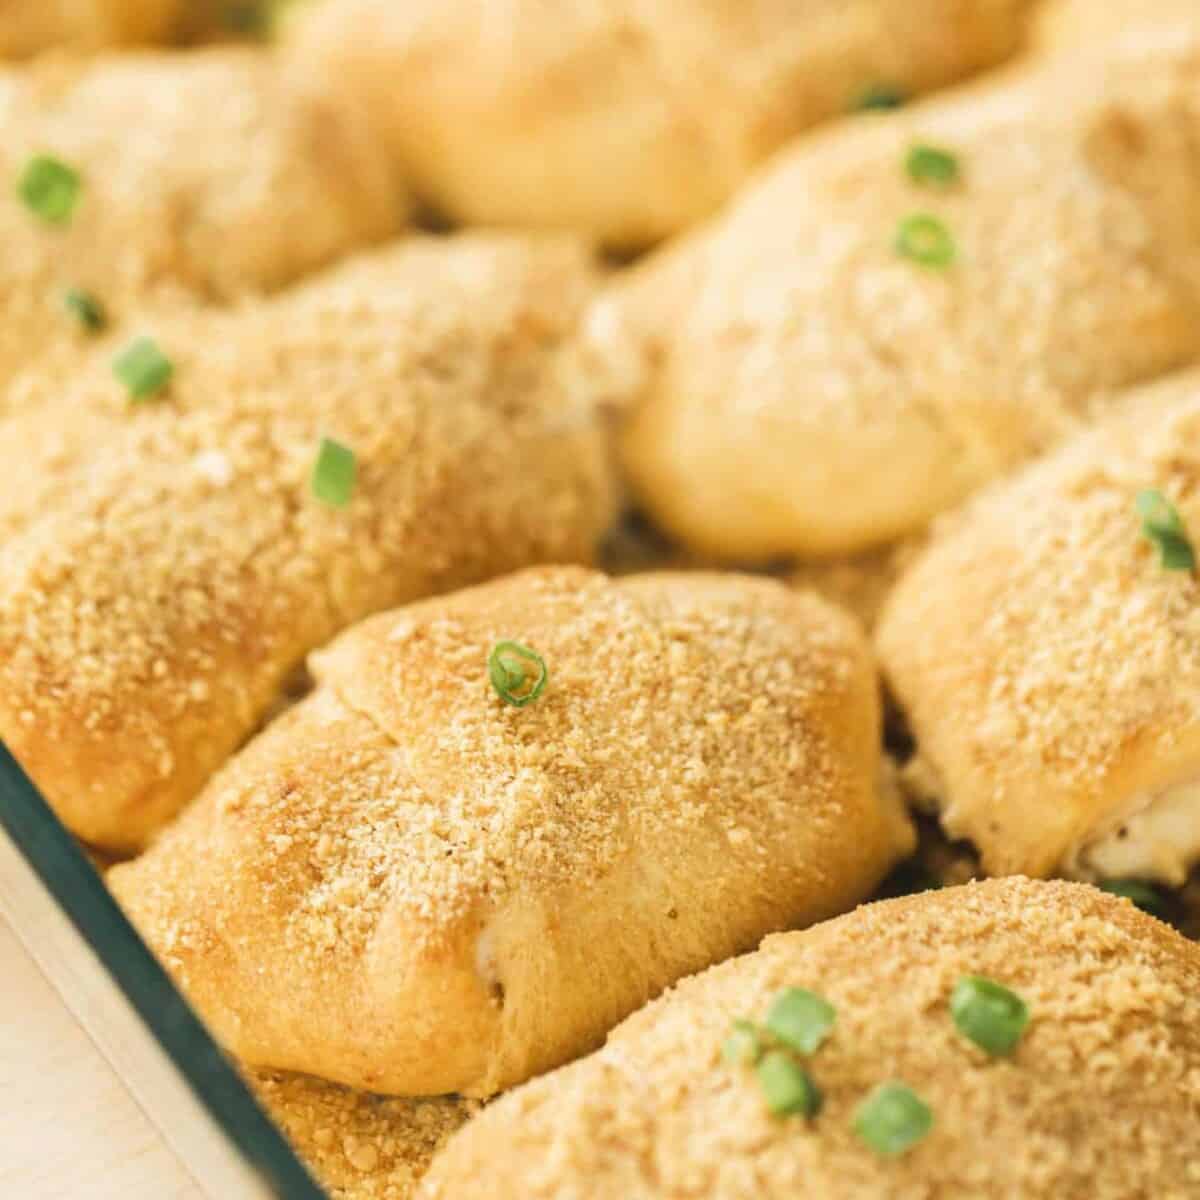 Chicken Crescent Roll Ups sit in a casserole dish, garnished and ready to eat.